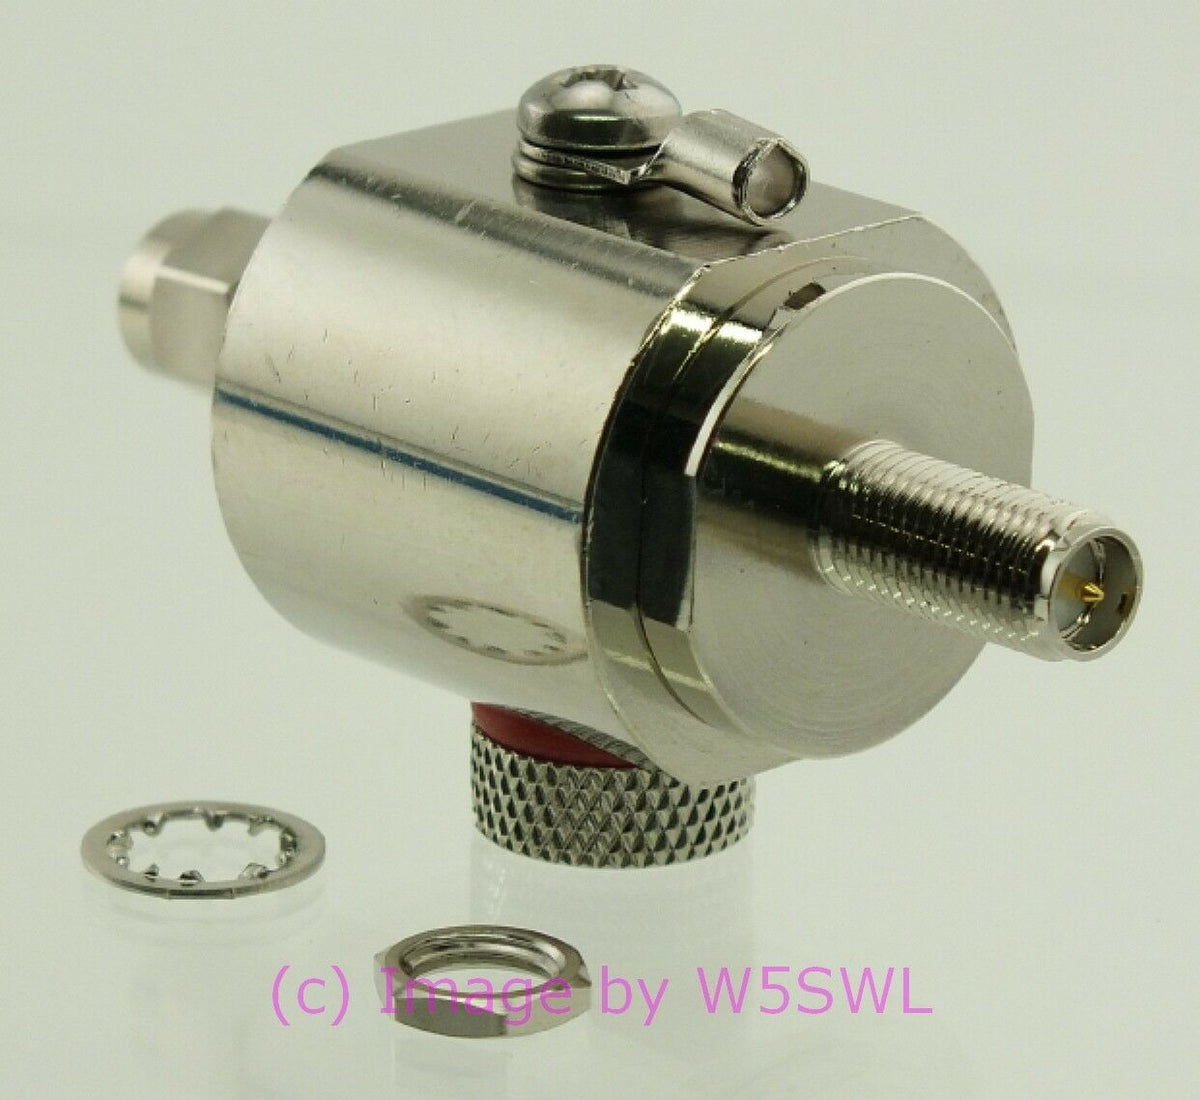 W5SWL Brand Surge EMP Protector Lightning Arrester Gas Tube RP SMA Male Female 6GHz - Dave's Hobby Shop by W5SWL